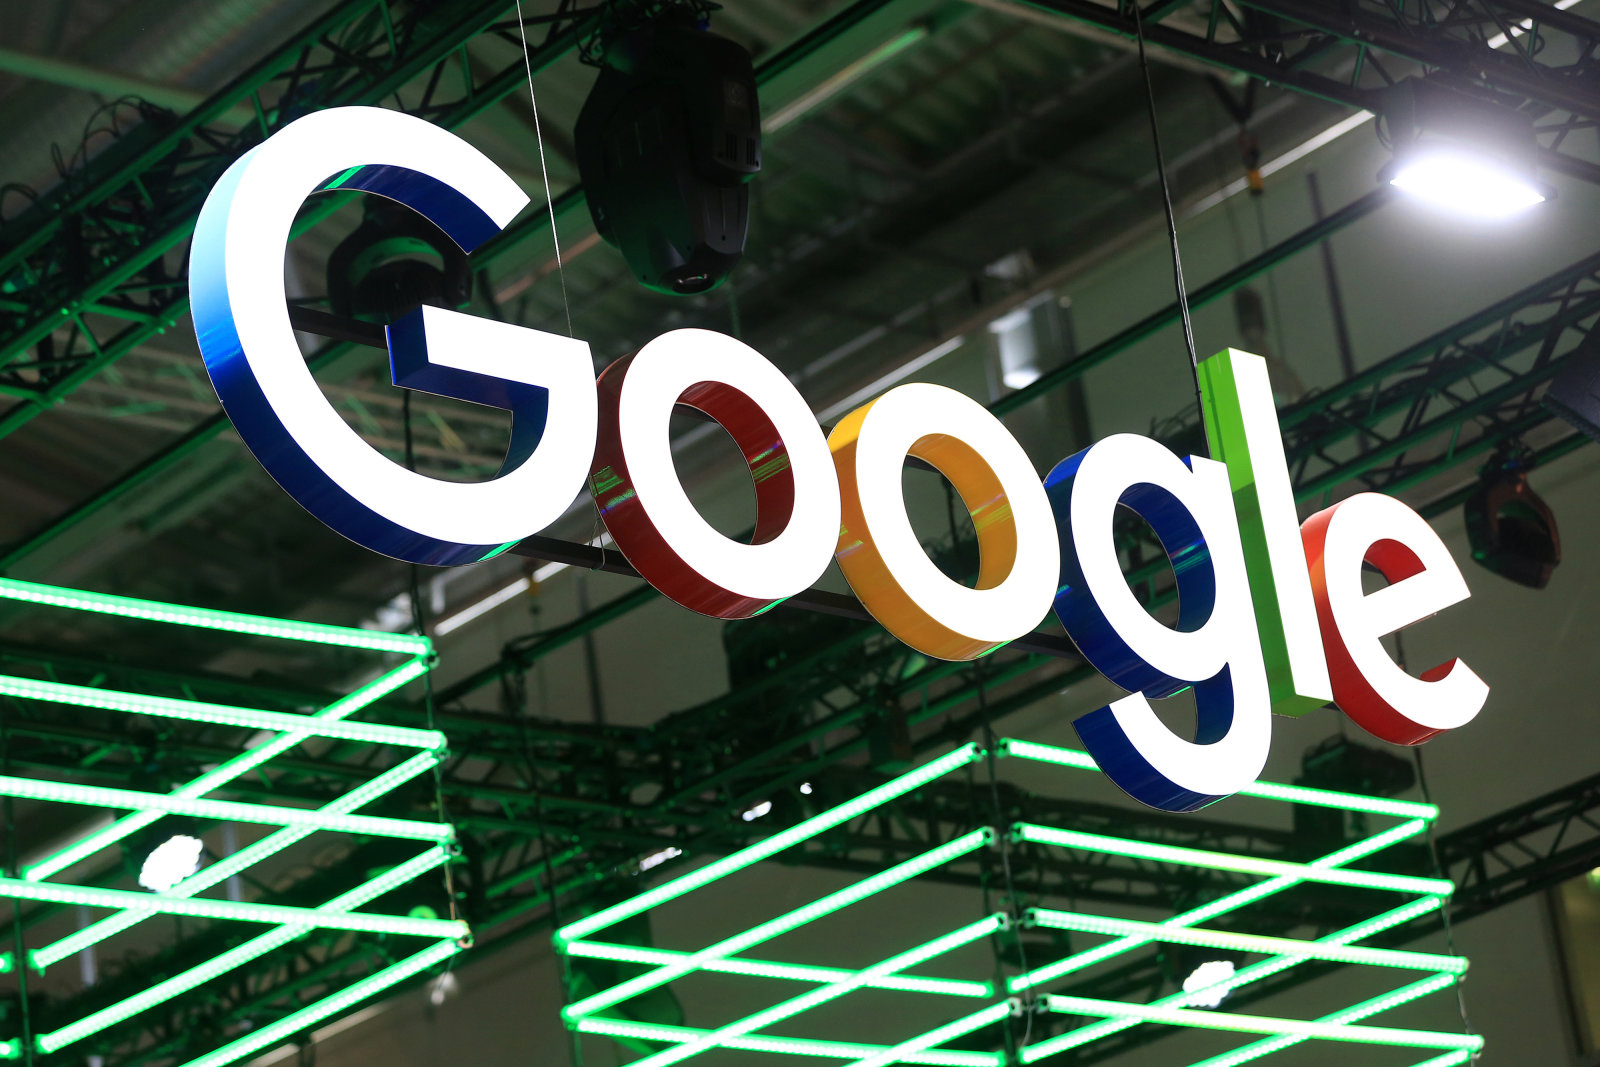 The Google Inc. logo hangs illuminated over the company's exhibition stand at the Dmexco digital marketing conference in Cologne, Germany, on Wednesday, Sept. 14, 2016. Dmexco is a two-day global business and digital economy innovation platform, attracting the industry's most important personalities and corporate decision-makers. Photographer: Krisztian Bocsi/Bloomberg via Getty Images